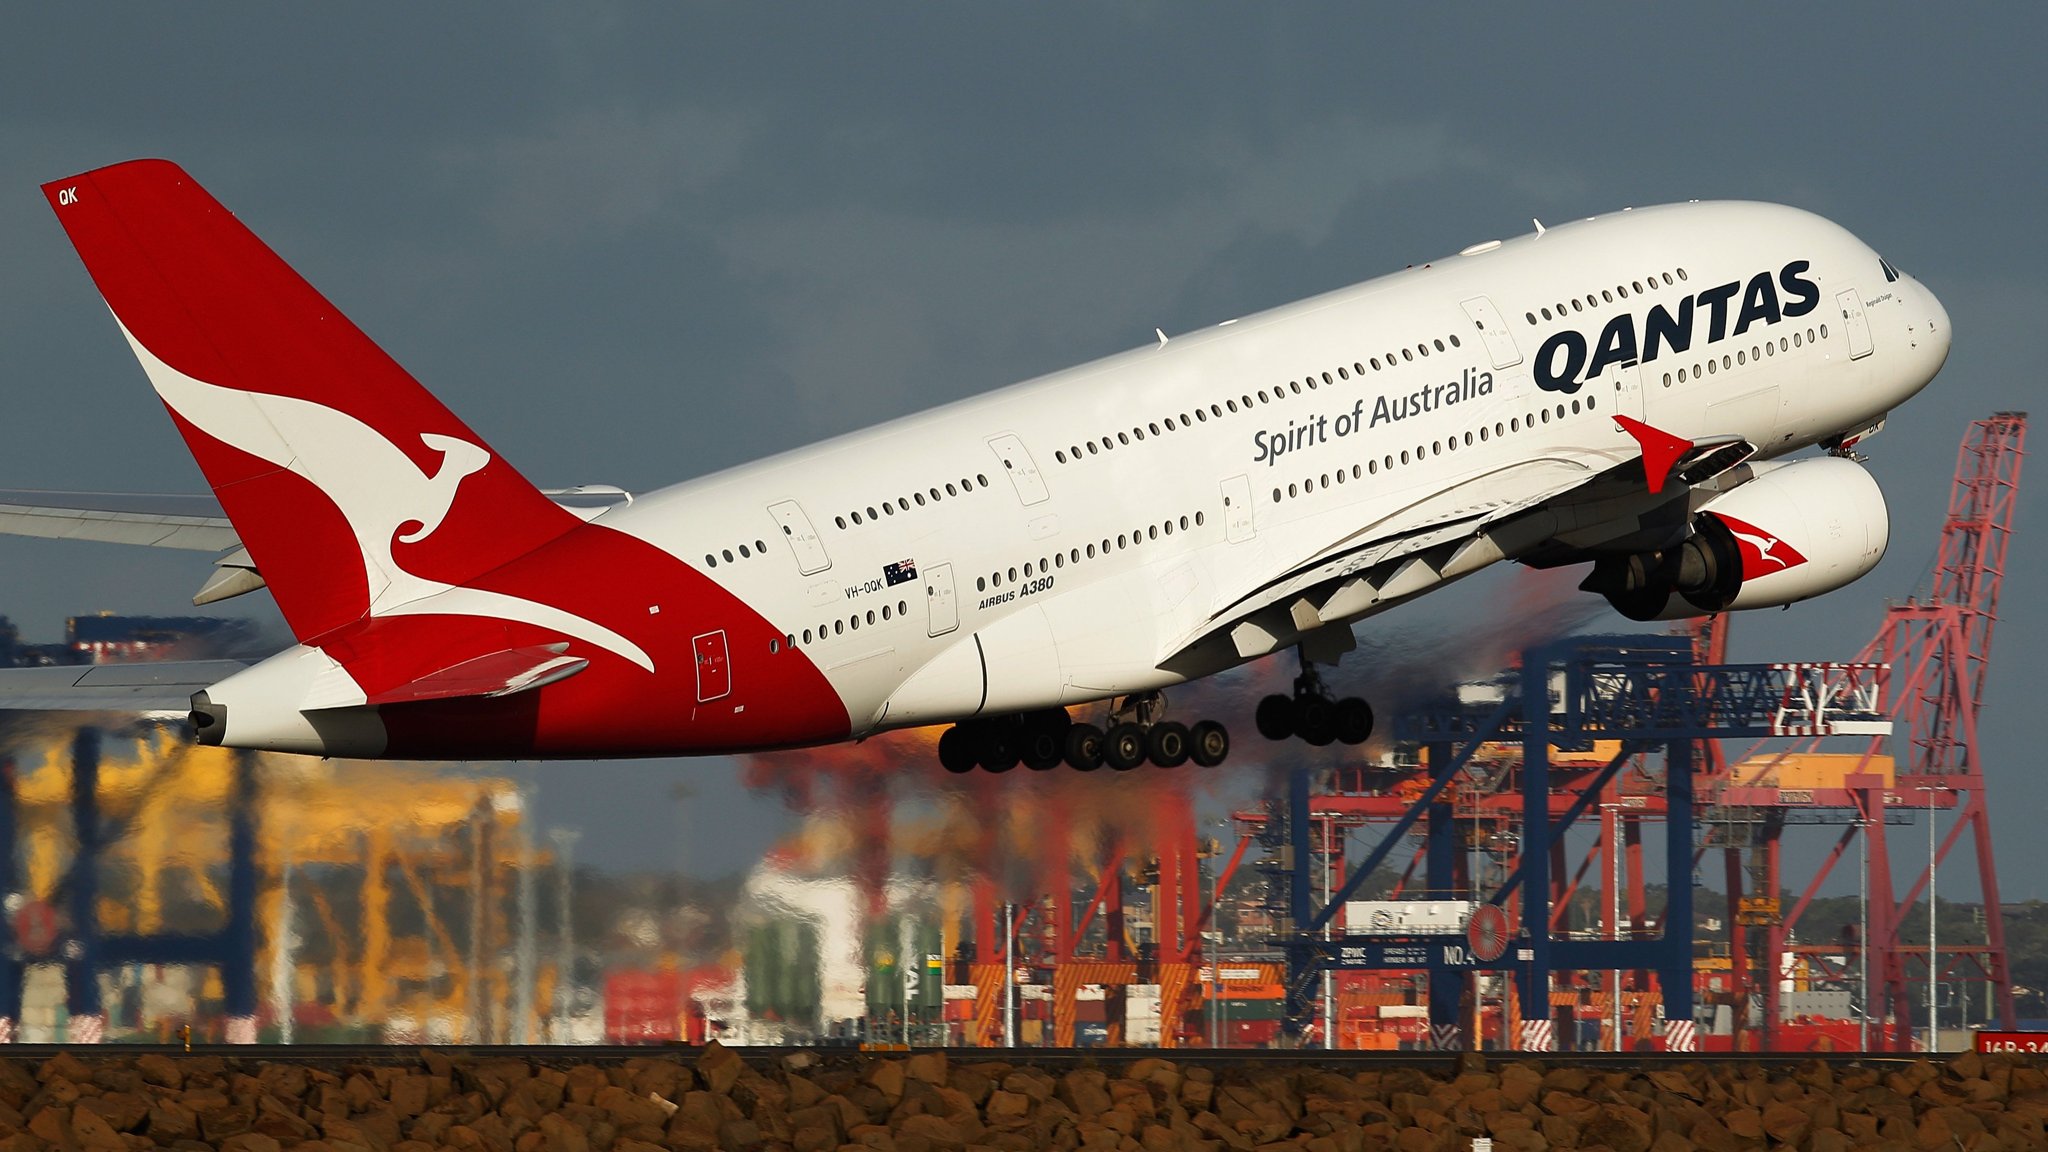 Australian Airline Qantas Breaks A World Record With A Direct Flight From London To Sydney